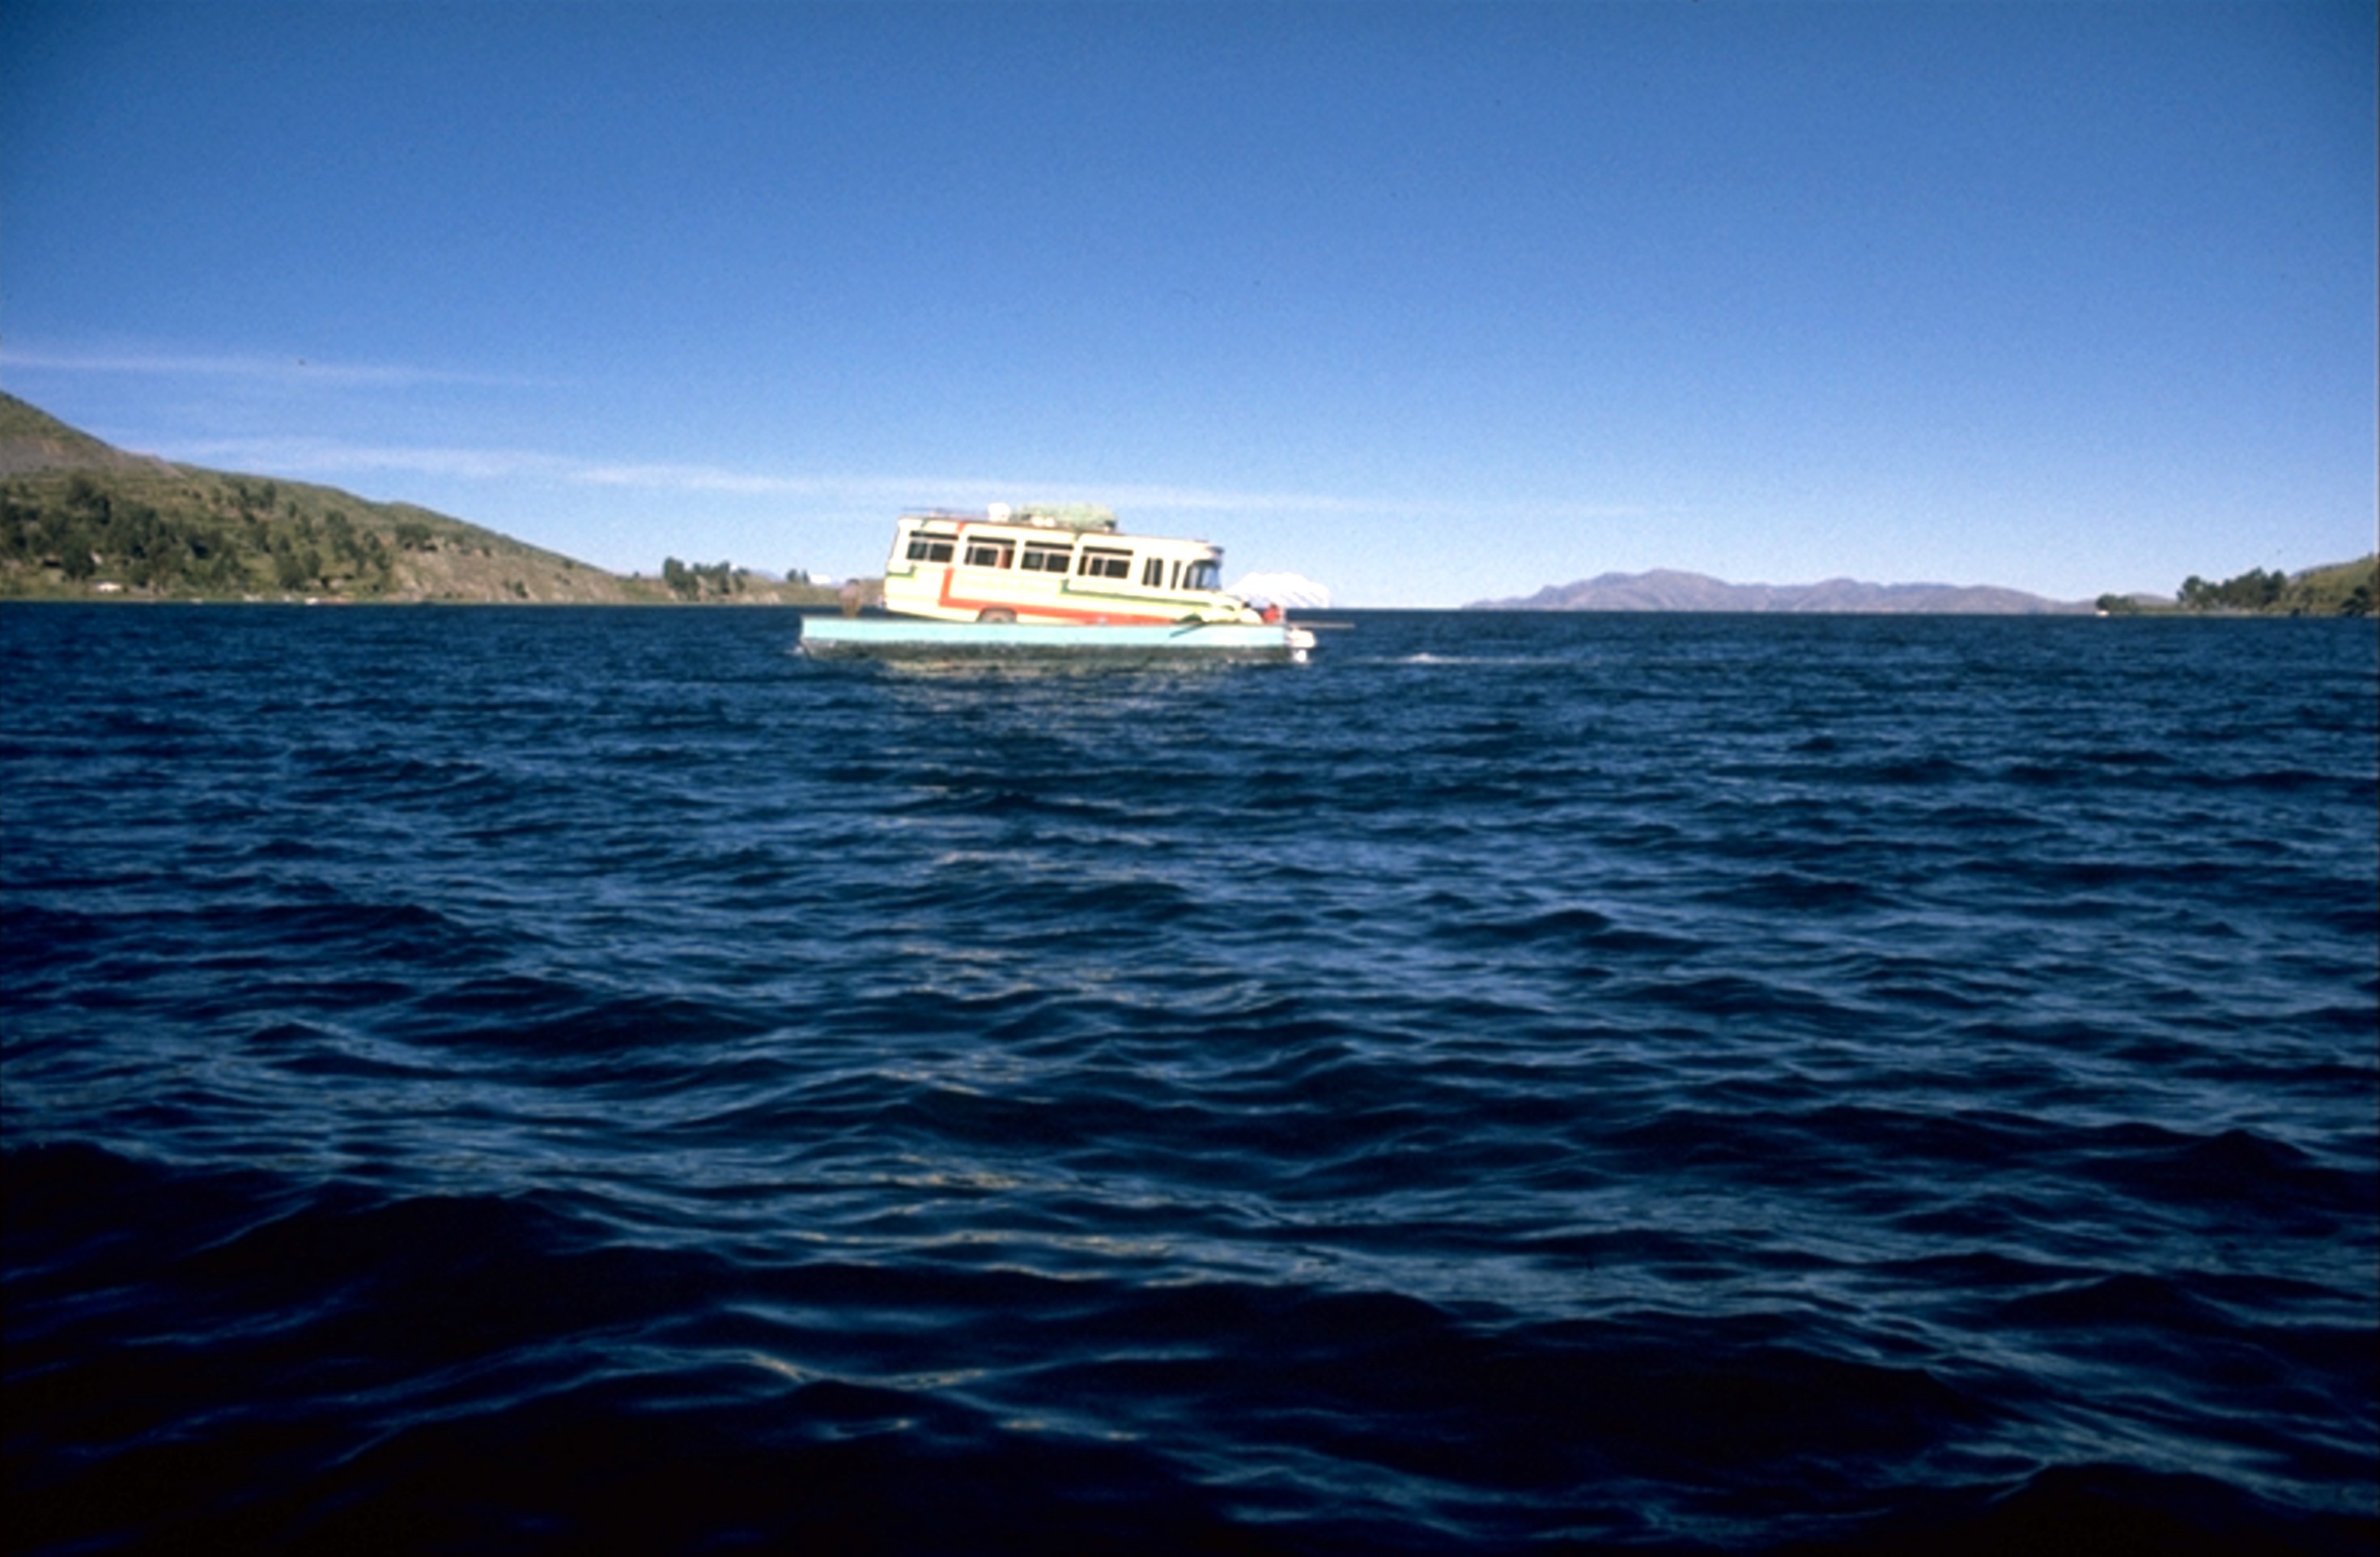 bus on ferry Lake Titicaca 1980